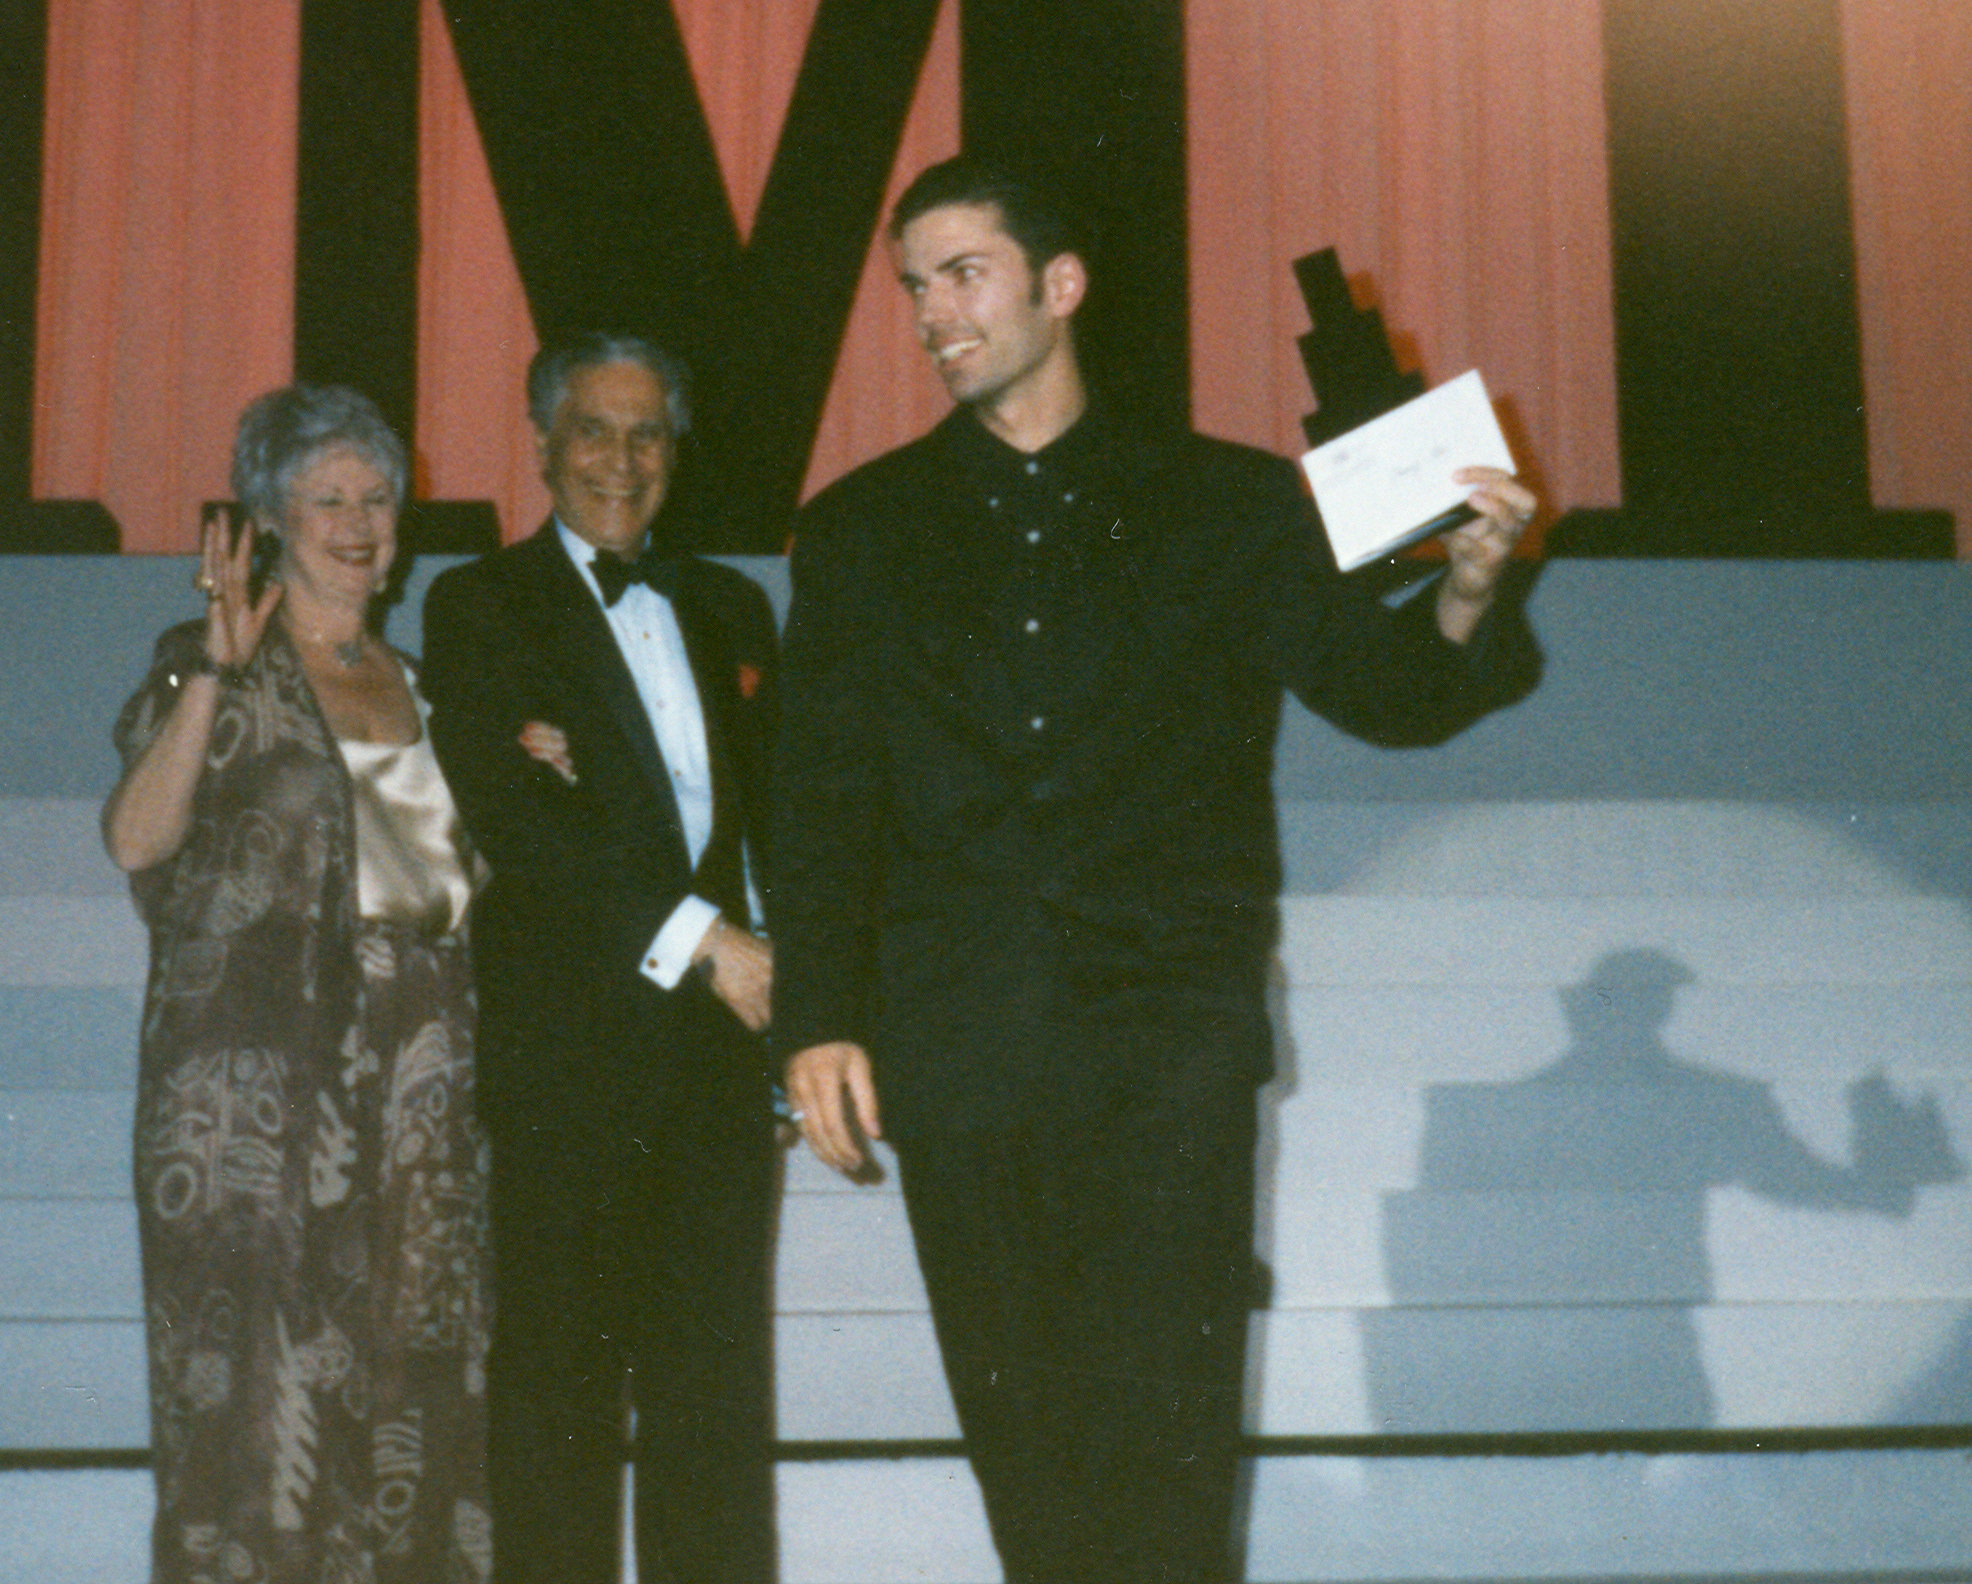 Sacha Pommepuy (far right) accepting an award for dramatic acting at the IMTA.